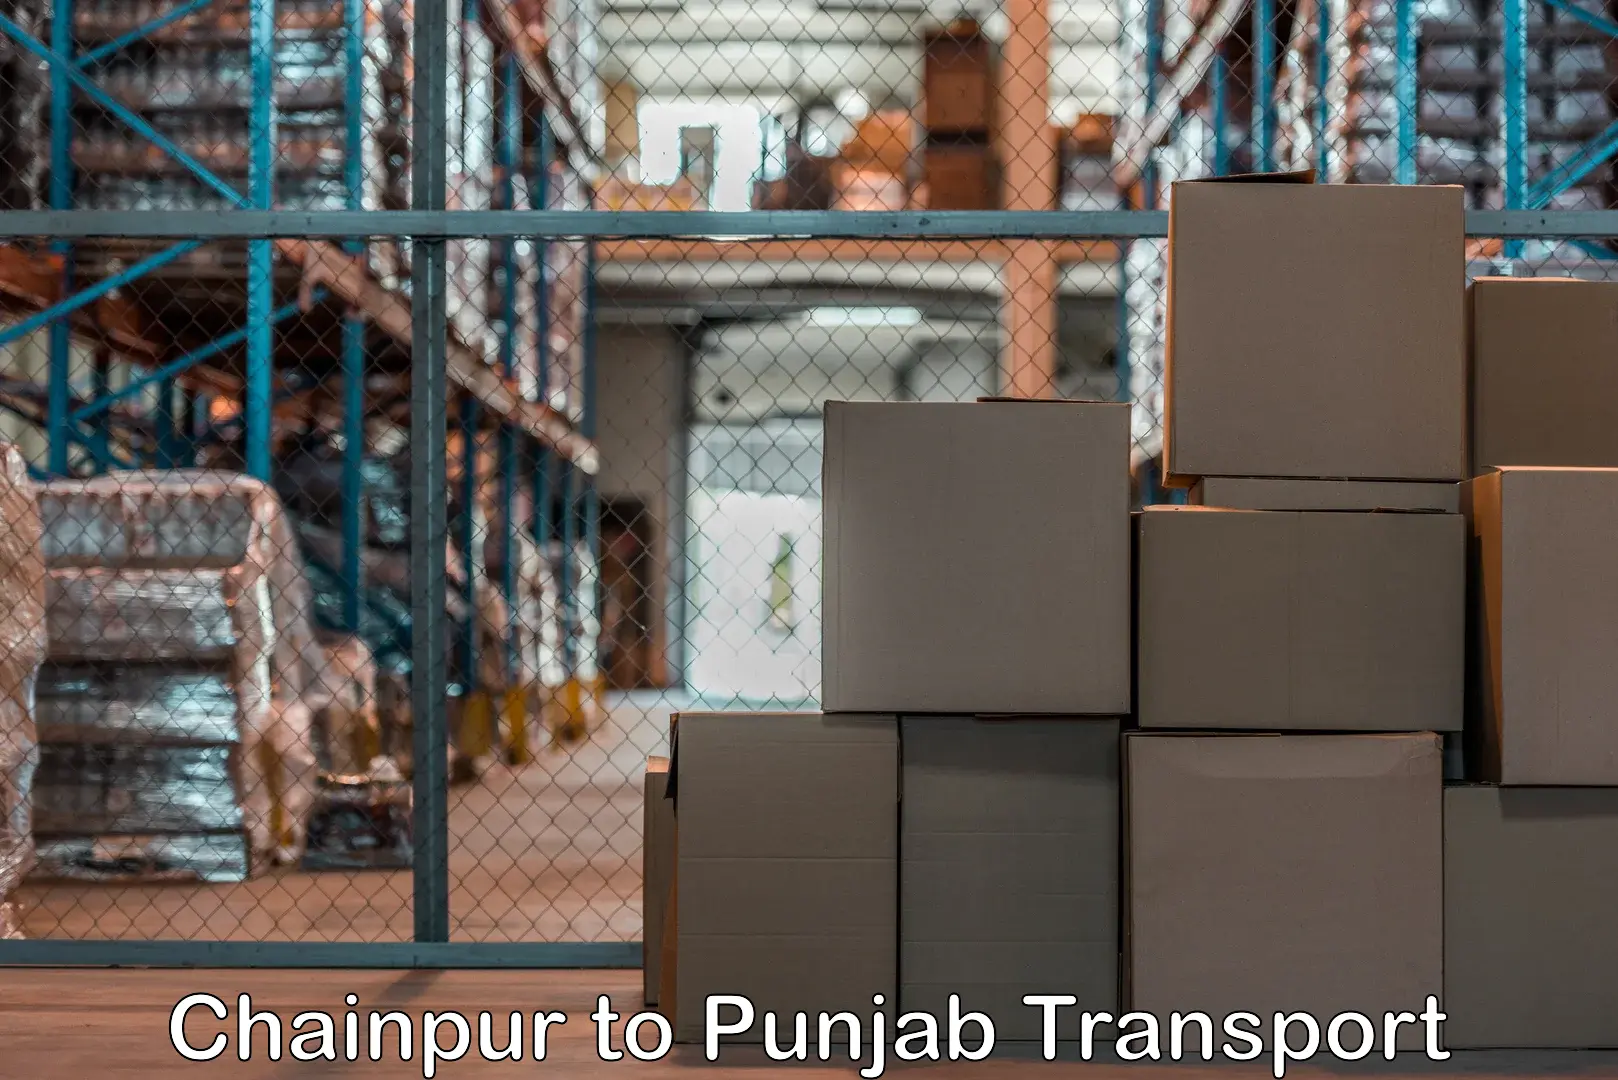 Online transport service in Chainpur to Mohali